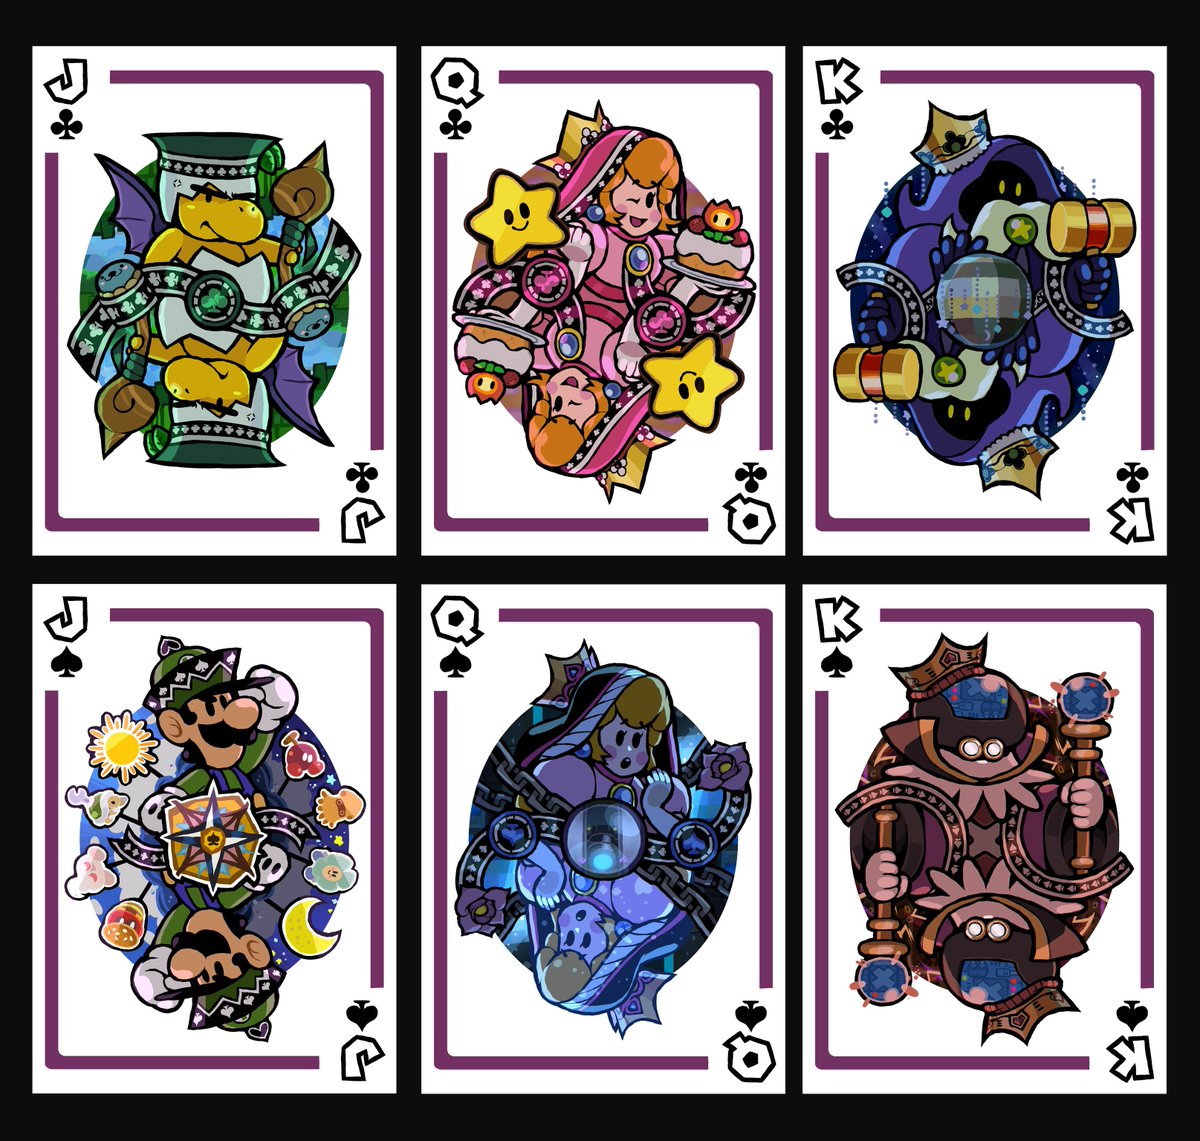 I decided that I wanted to give the face cards a "face" lift. *wink* #illustration  #digitalillustration  #gameart  #fanart  #digitalart  #art  #supermario    #mario    #papermario  #nintendo64  #gamecube  #ttyd  #playingcards  #series  #king  #queen  #jack  #deck  #cards  #nintendo